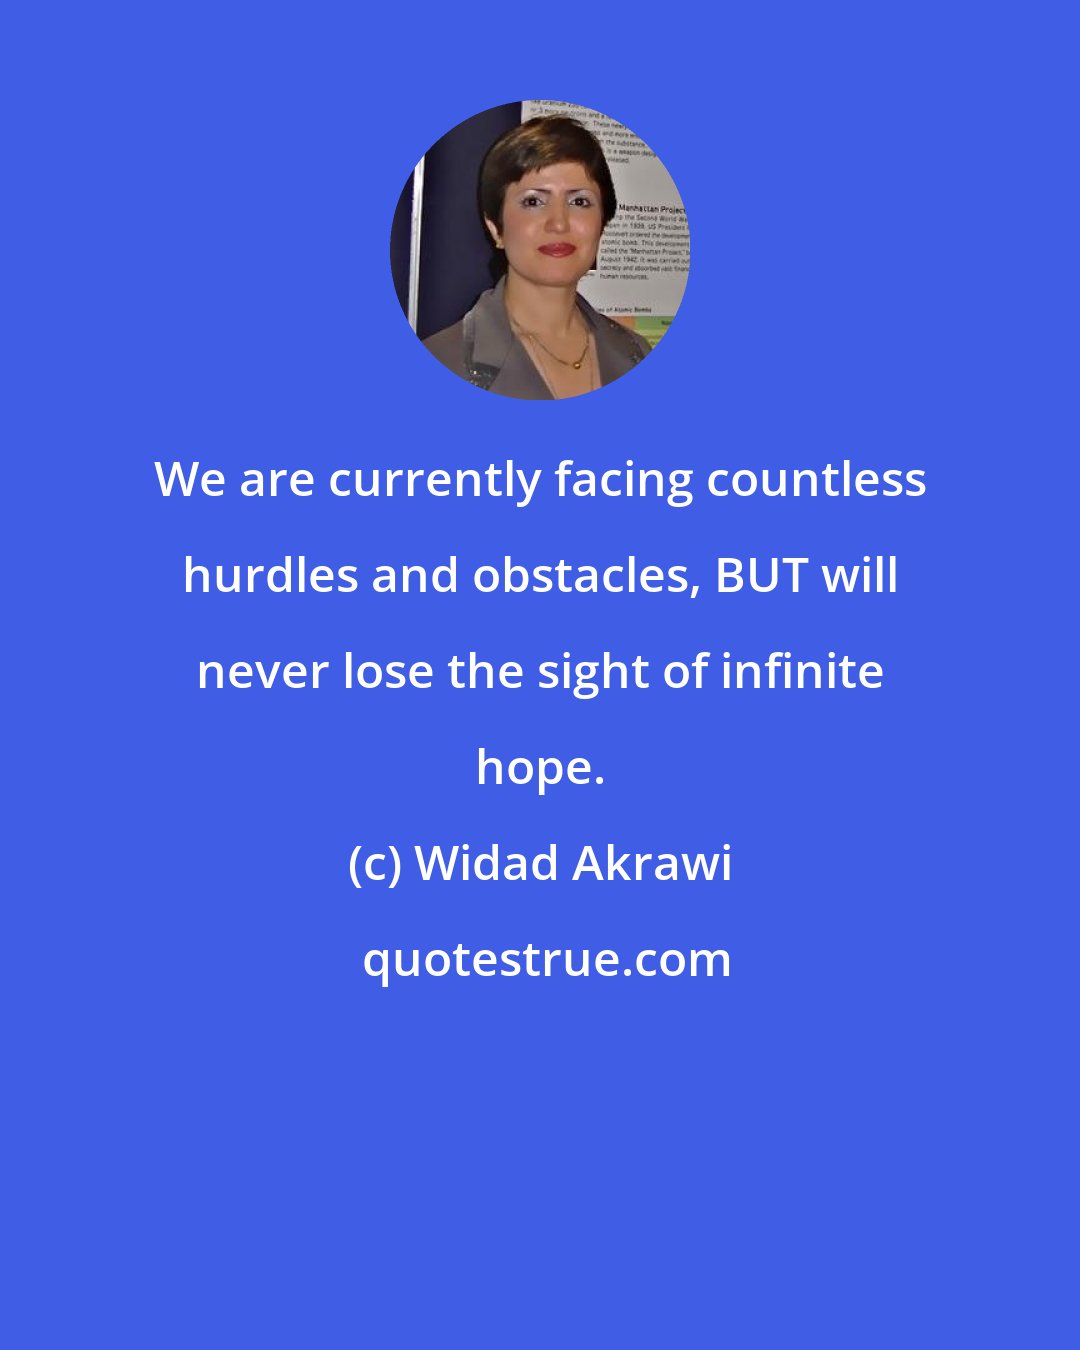 Widad Akrawi: We are currently facing countless hurdles and obstacles, BUT will never lose the sight of infinite hope.